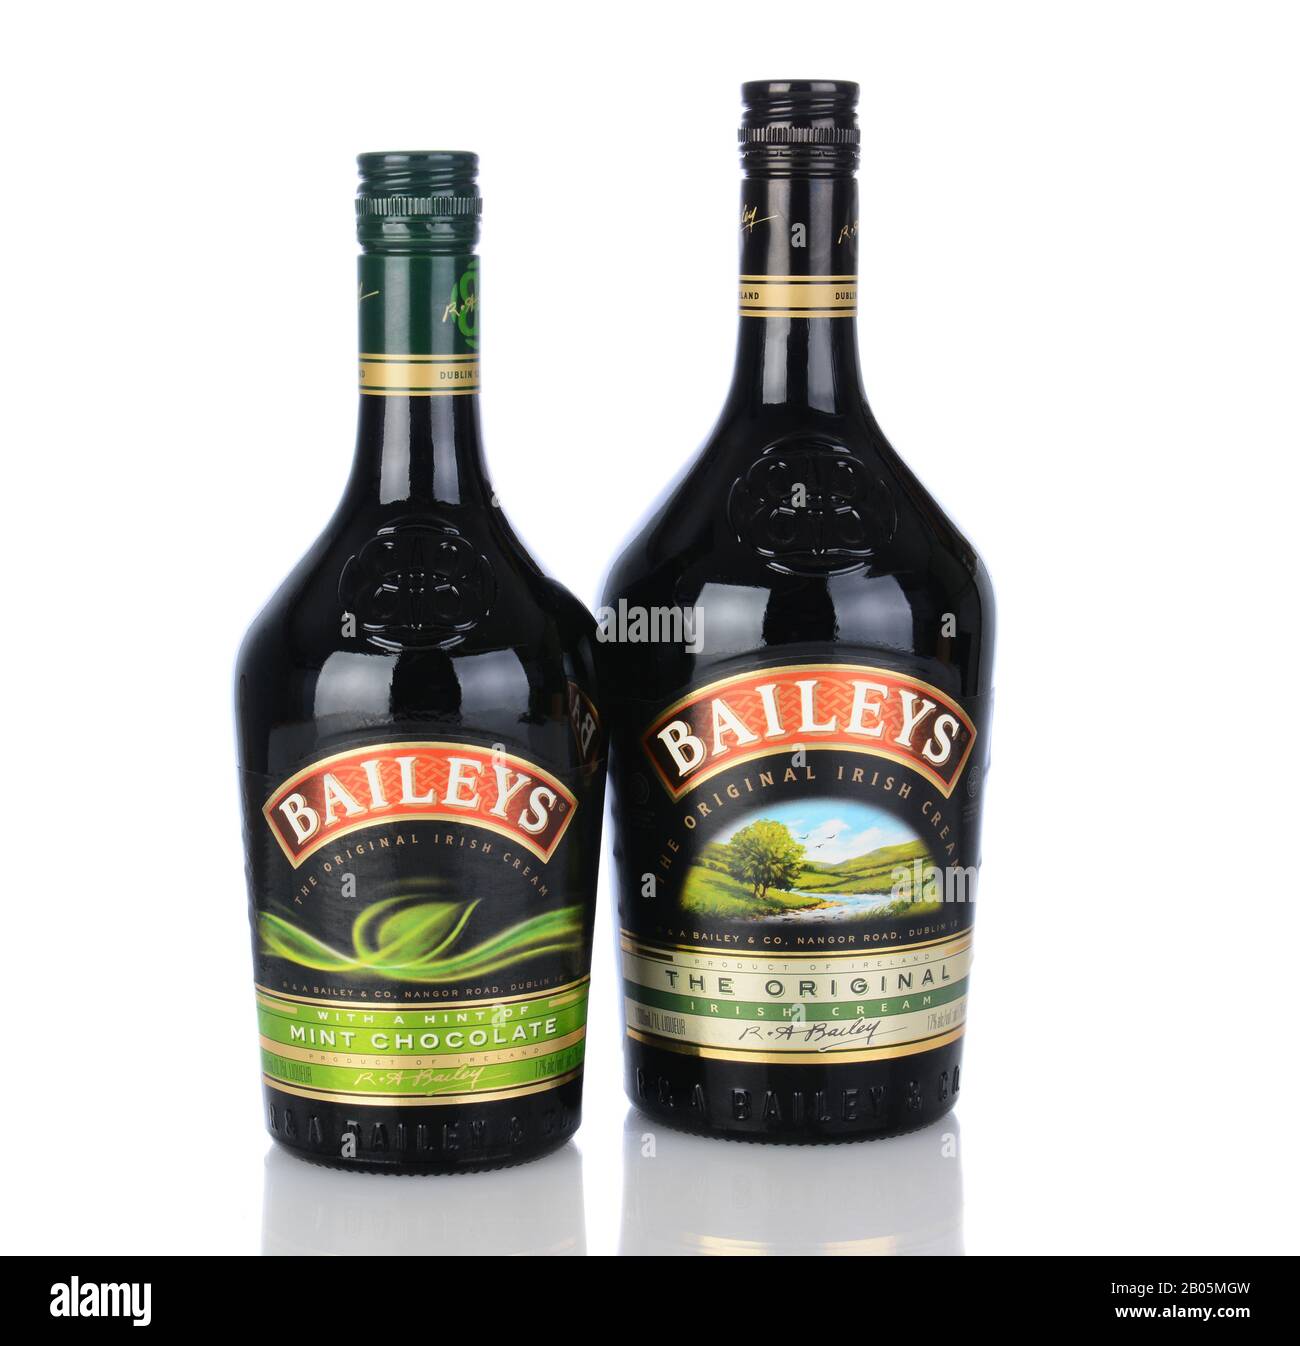 IRVINE, CA - January 11, 2013: A bottle of Baileys Irish Cream and Mint Chocolate Liqueur. Baileys, introduced in 1974, was the first Irish Cream to b Stock Photo